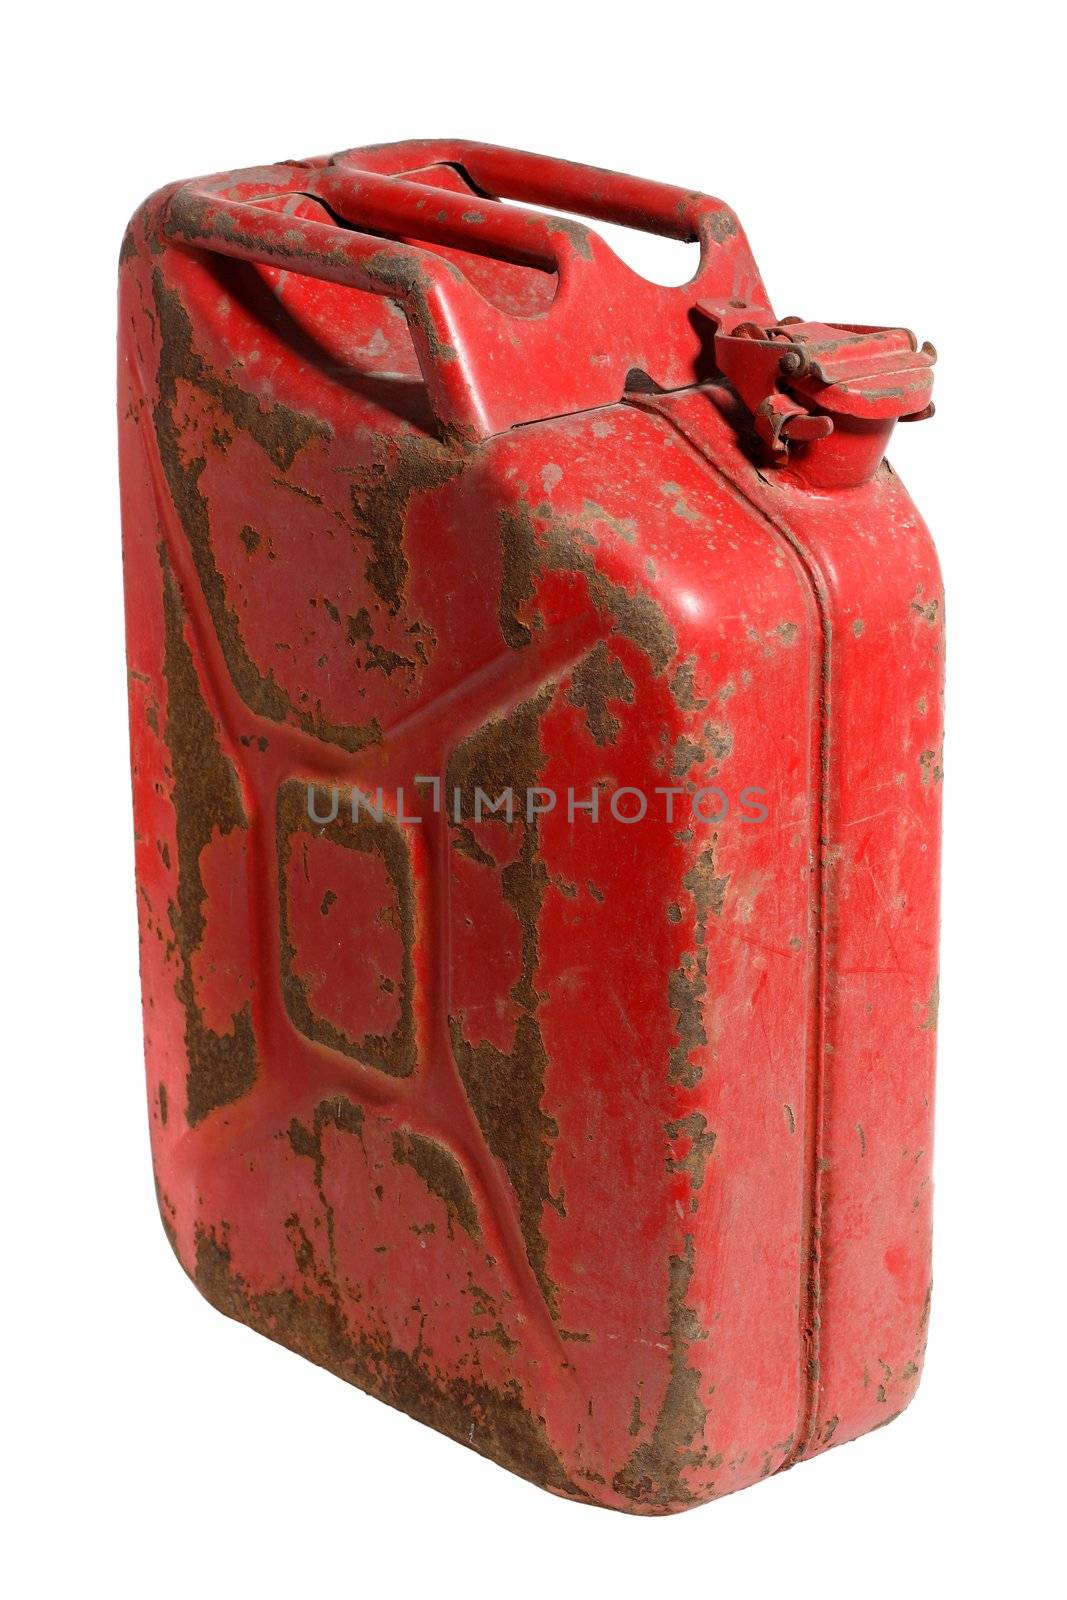 Gas can by Stocksnapper